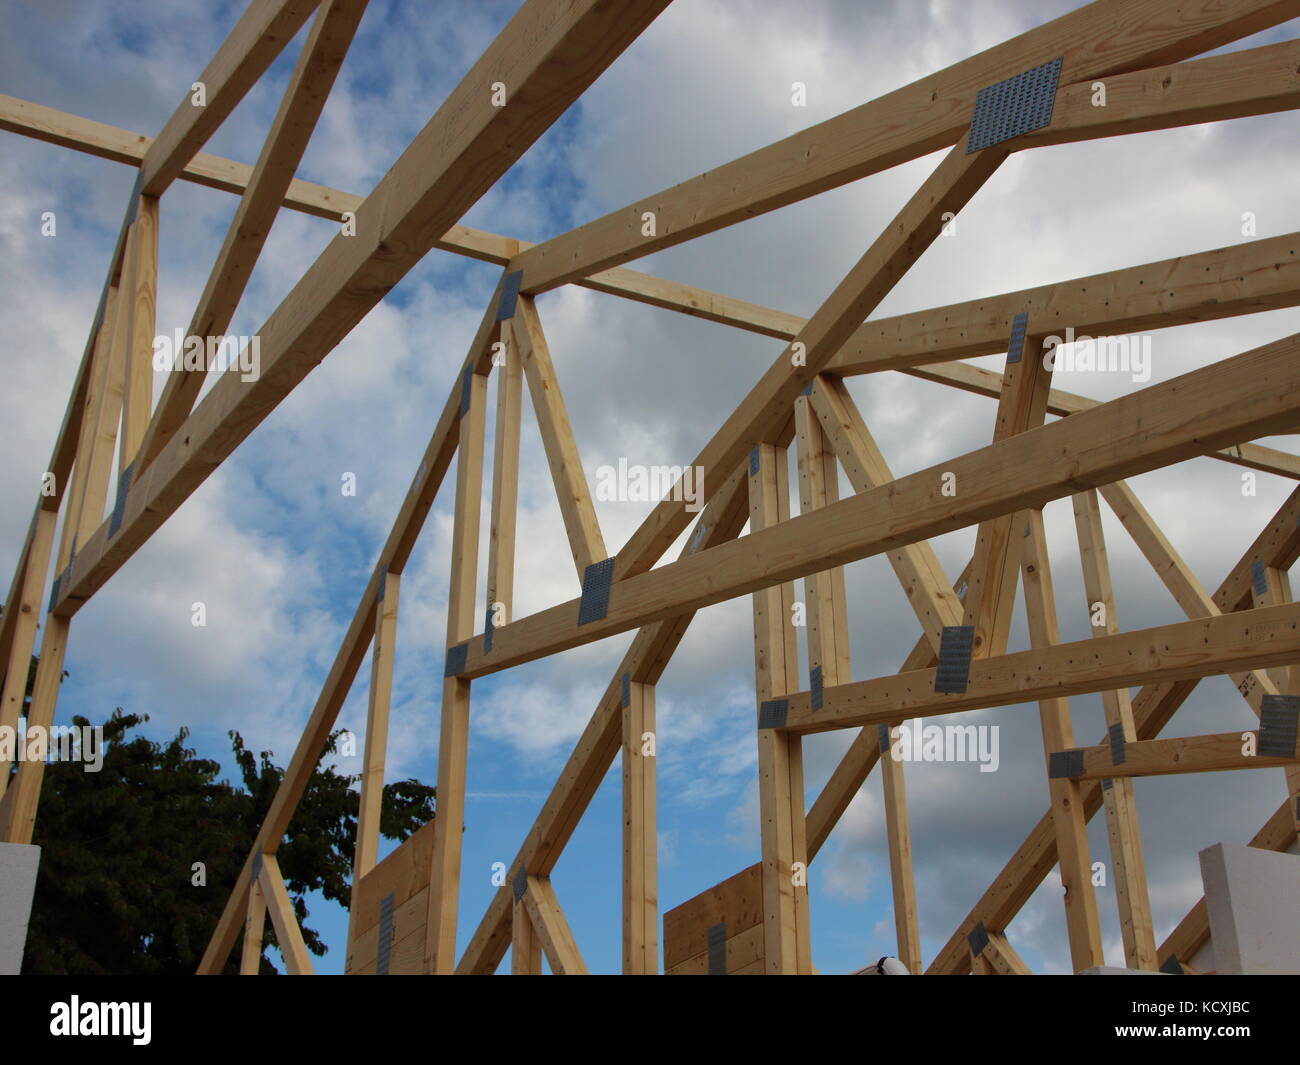 Roof Rafter Construction on Building Site with Sky and Clouds Stock Photo